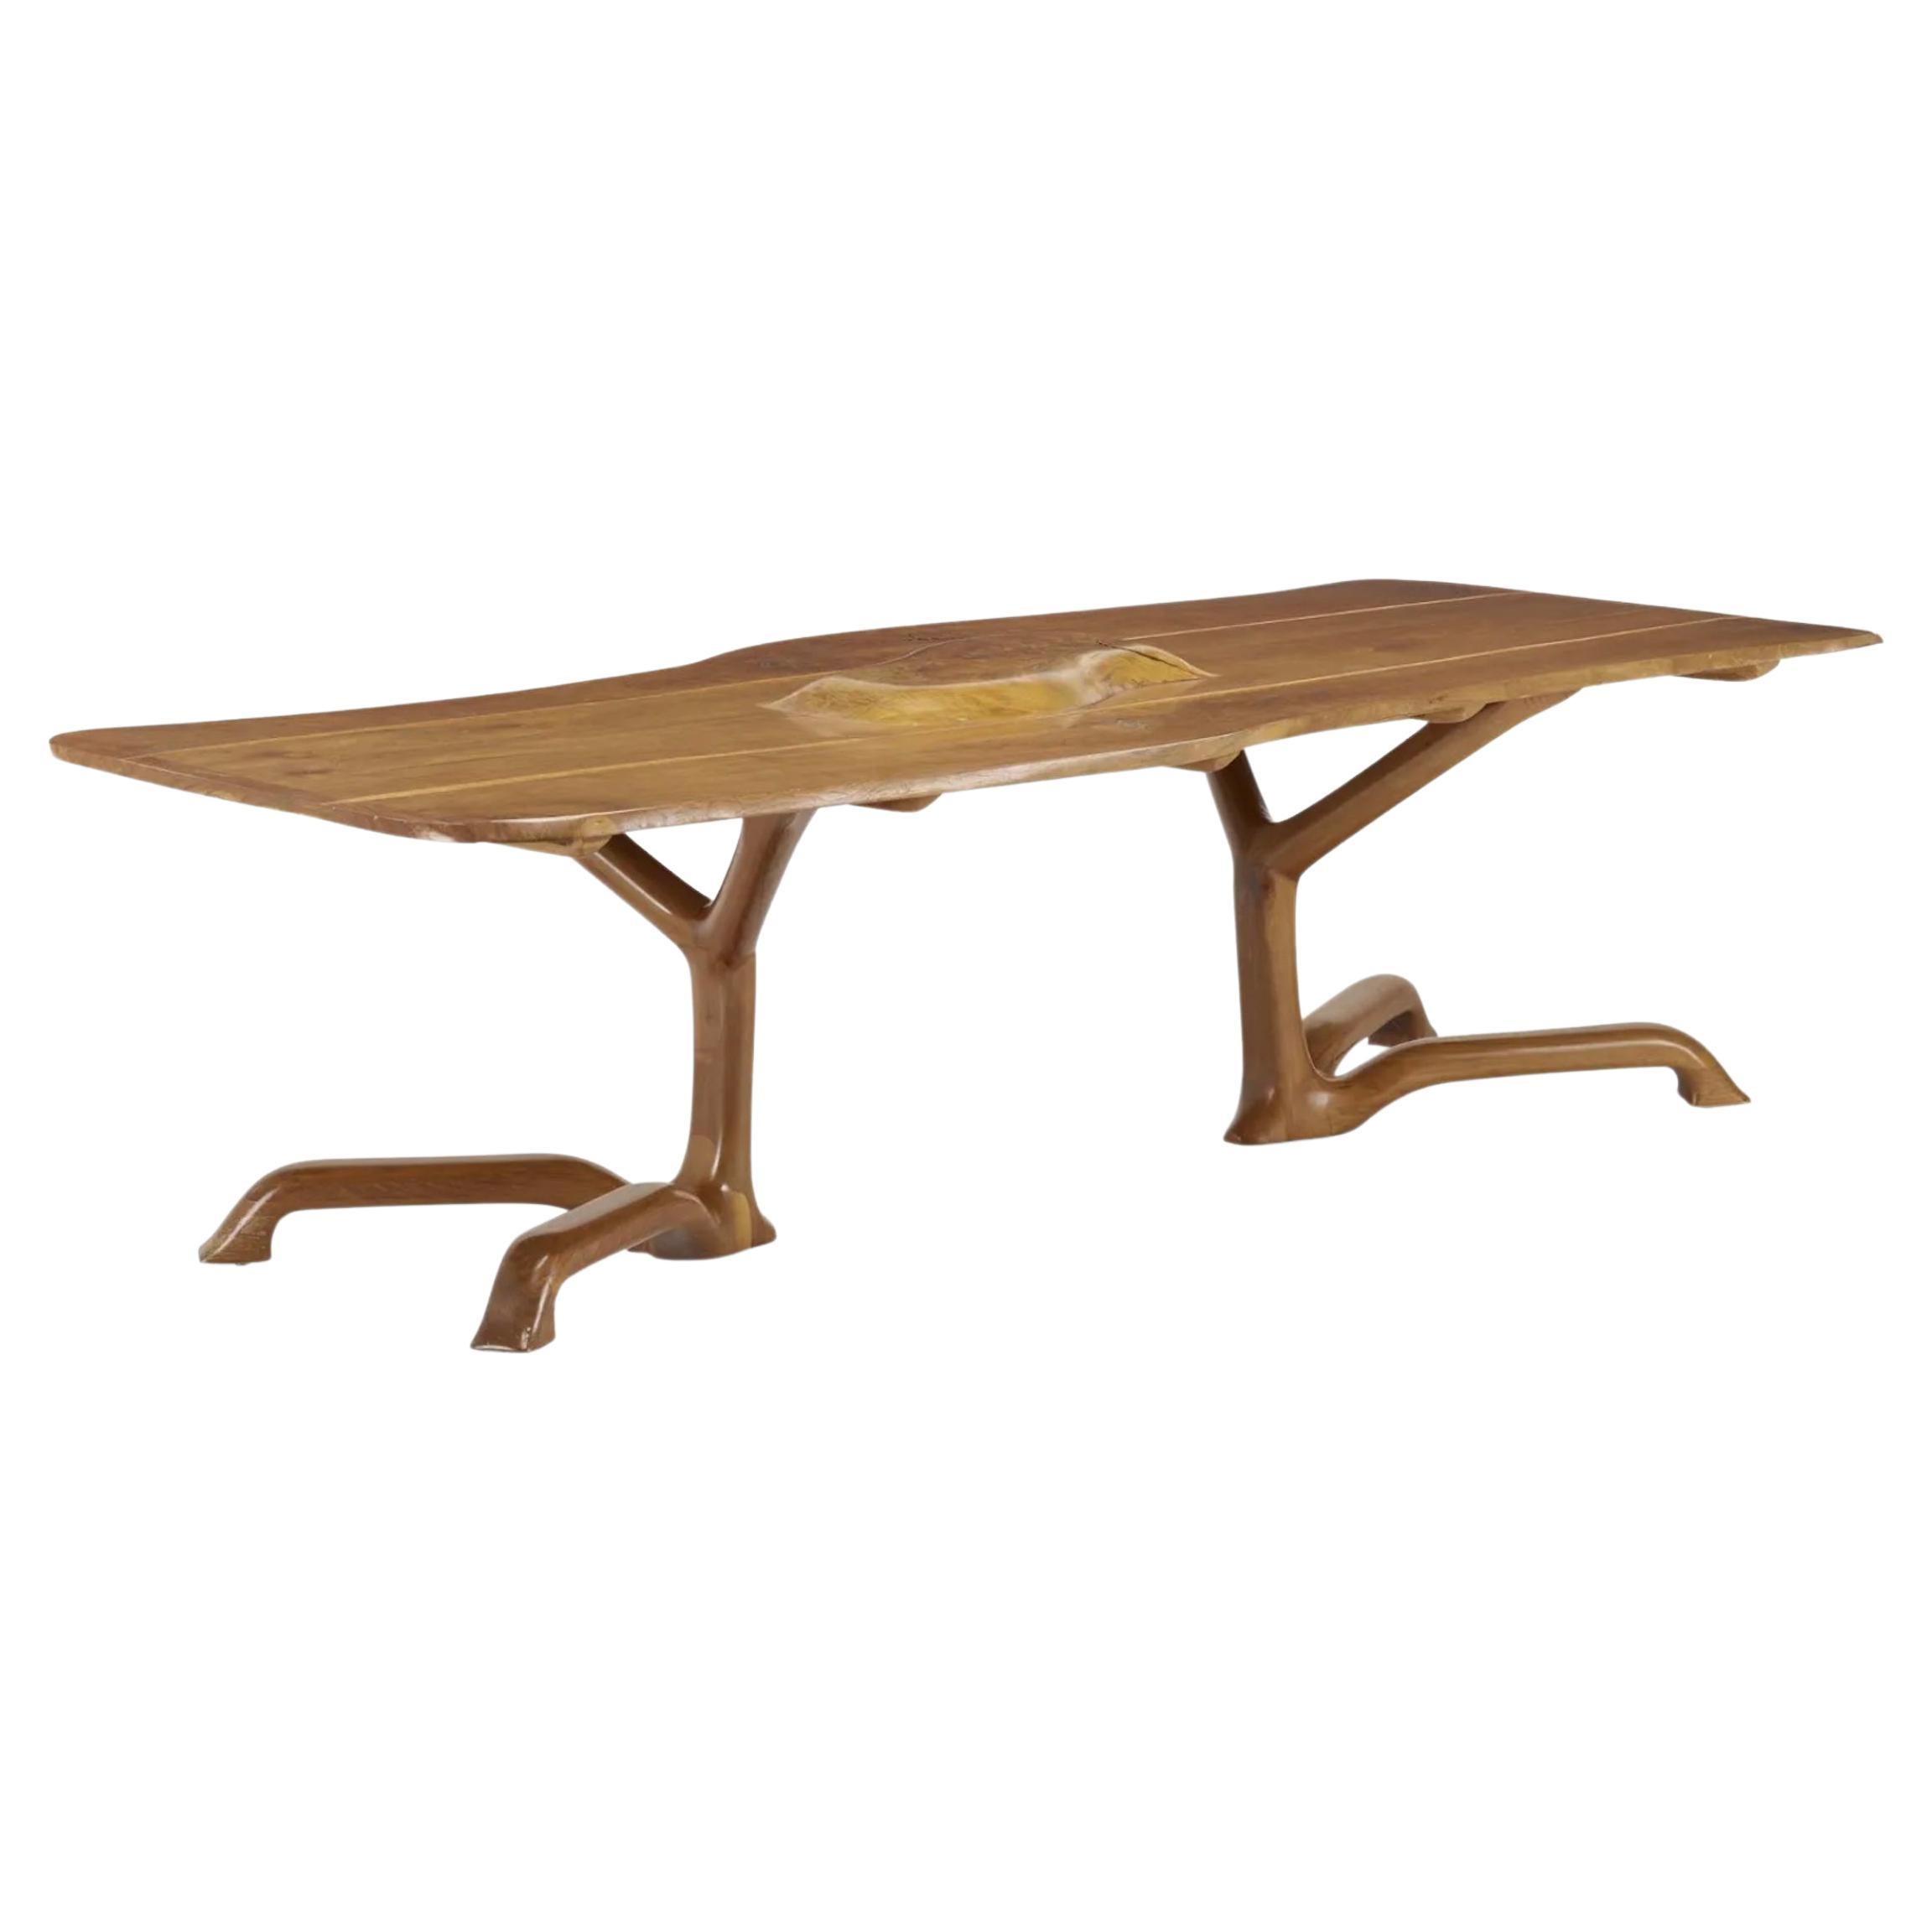 Whimsical handcrafted Organic Studio Craft Dining table 1974 by Woodworker Ejner Pagh. Made in USA, 1974 Solid cherry Wood
Signed and dated to stretchers on each base 'Ejner C. Pagh 74' Very Beautiful Studio Craft dining table Great for large